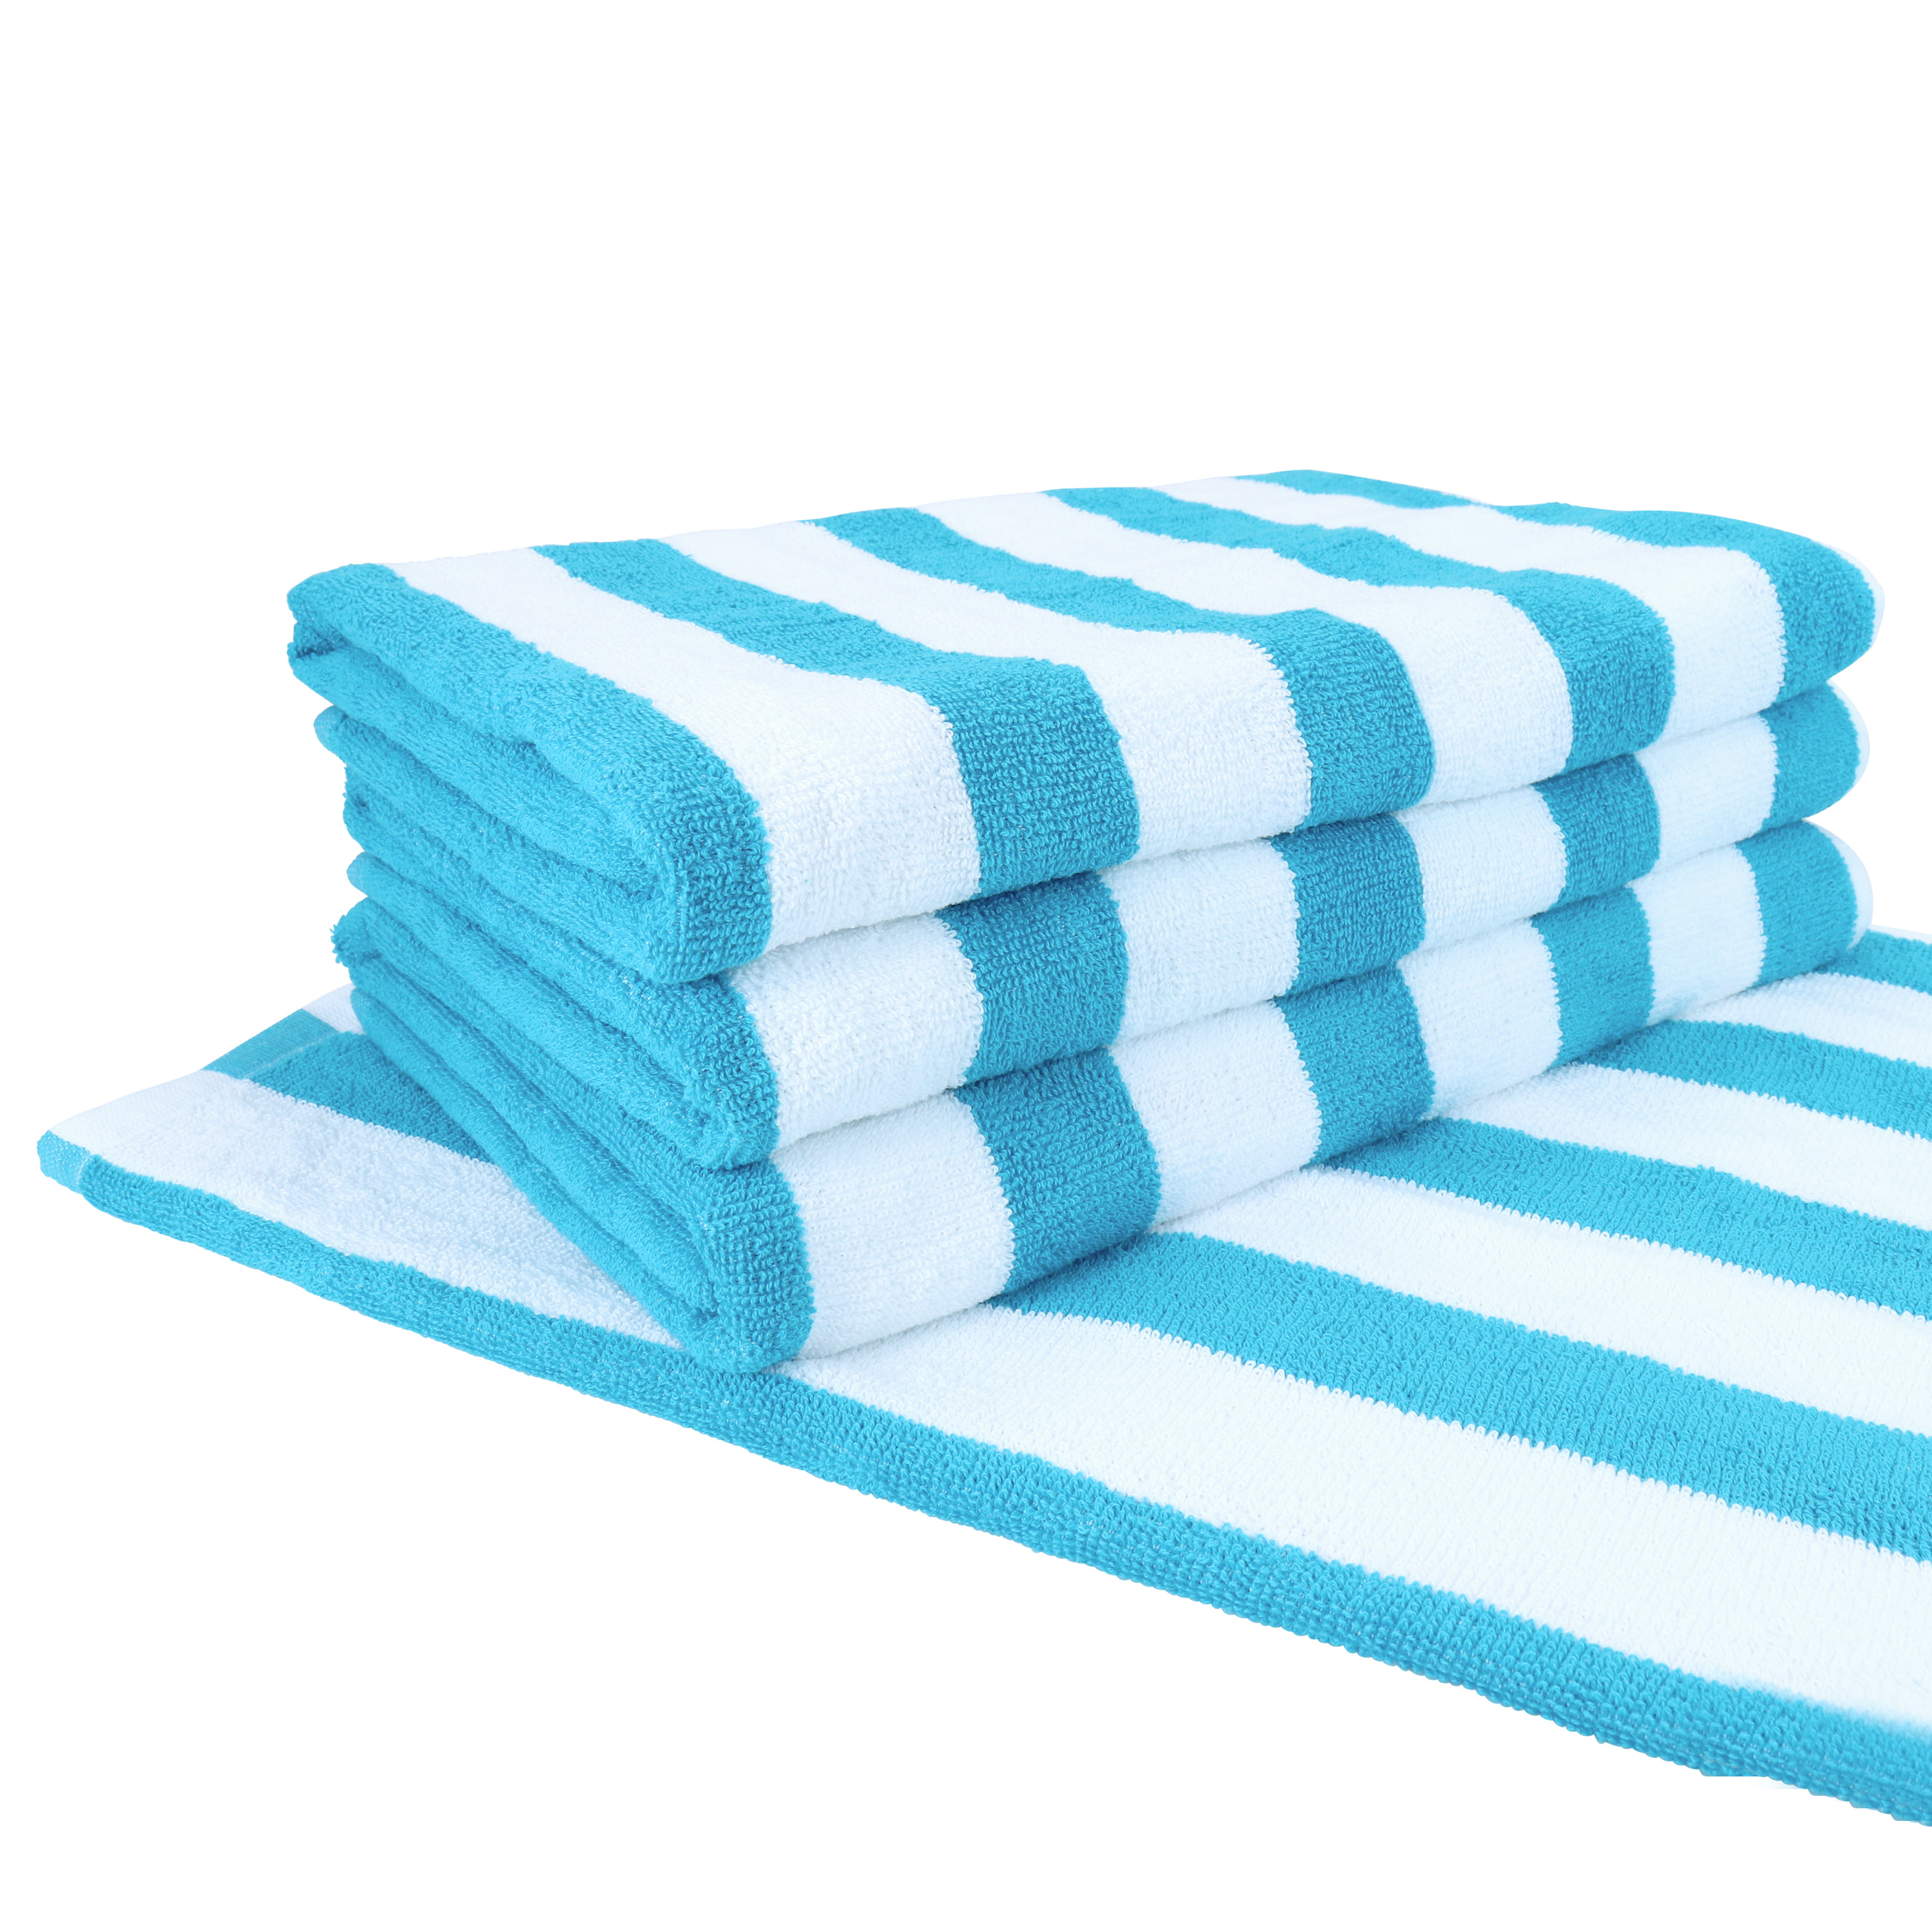 30x60 inches-Large Pool/Beach Cabana Towels Blue/Brown 4 pieces Pack 